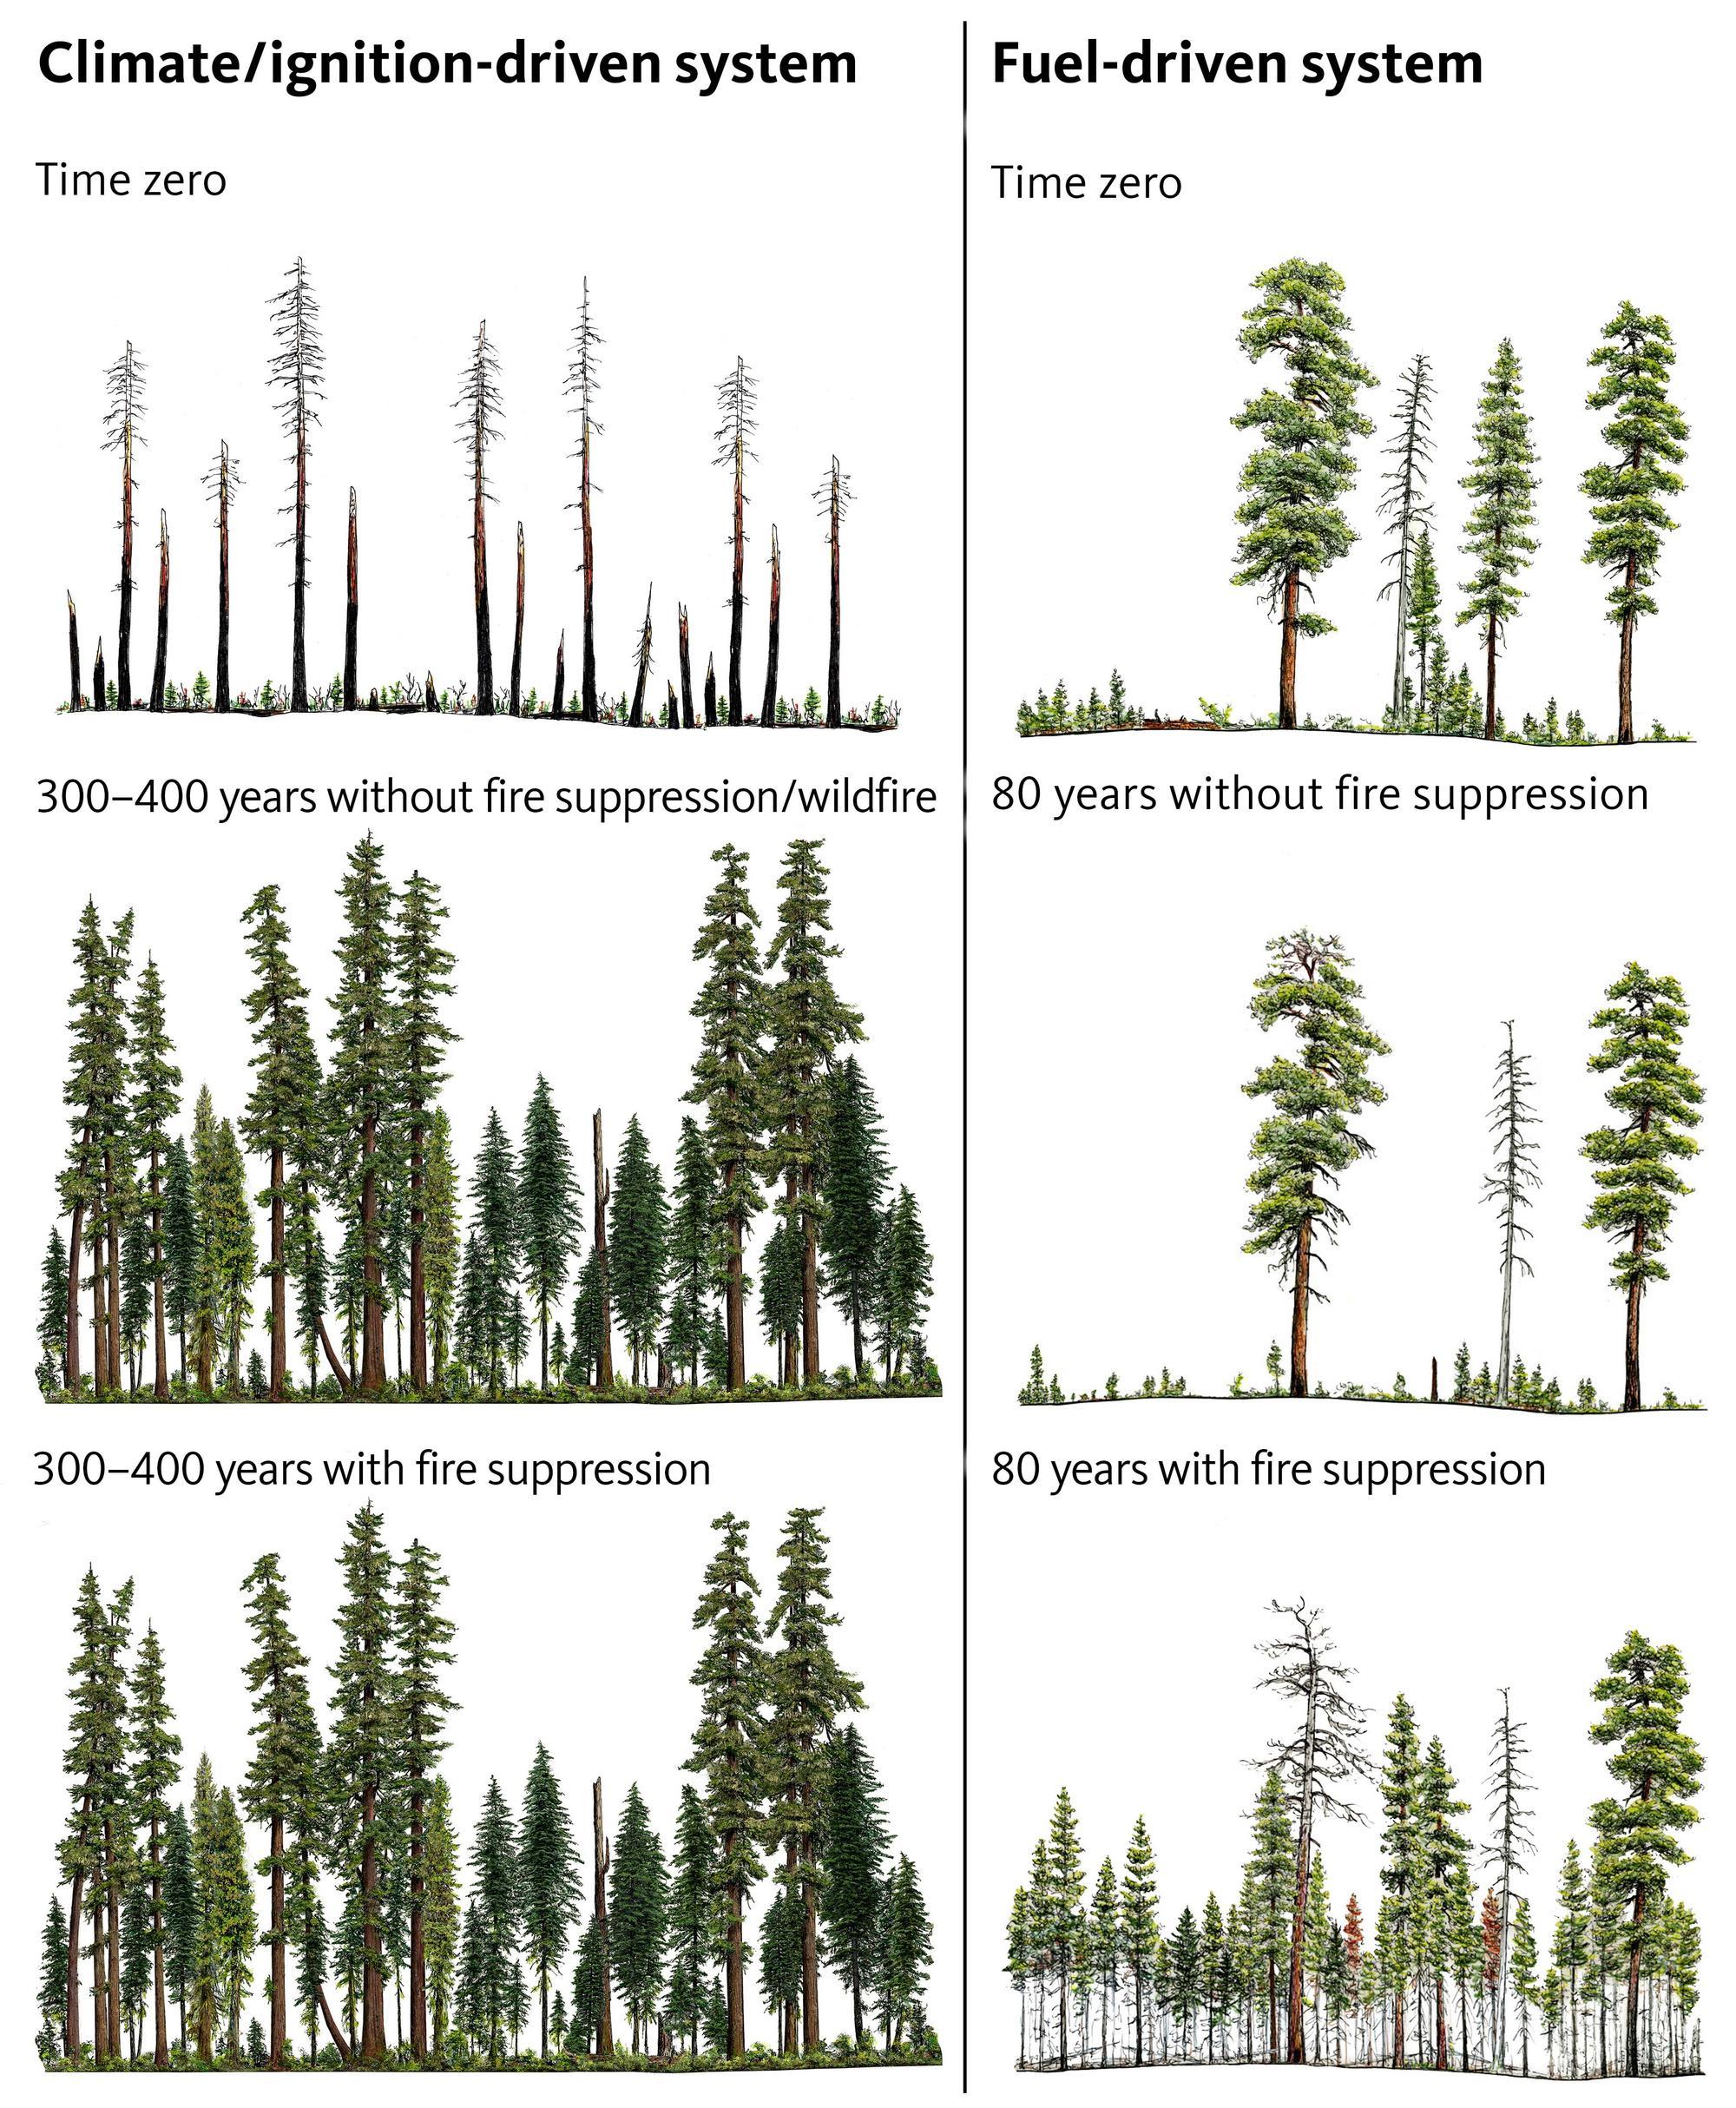 An illustration showing the structural differences between forests with climate/ignition-limited fire regimes and fuel-l